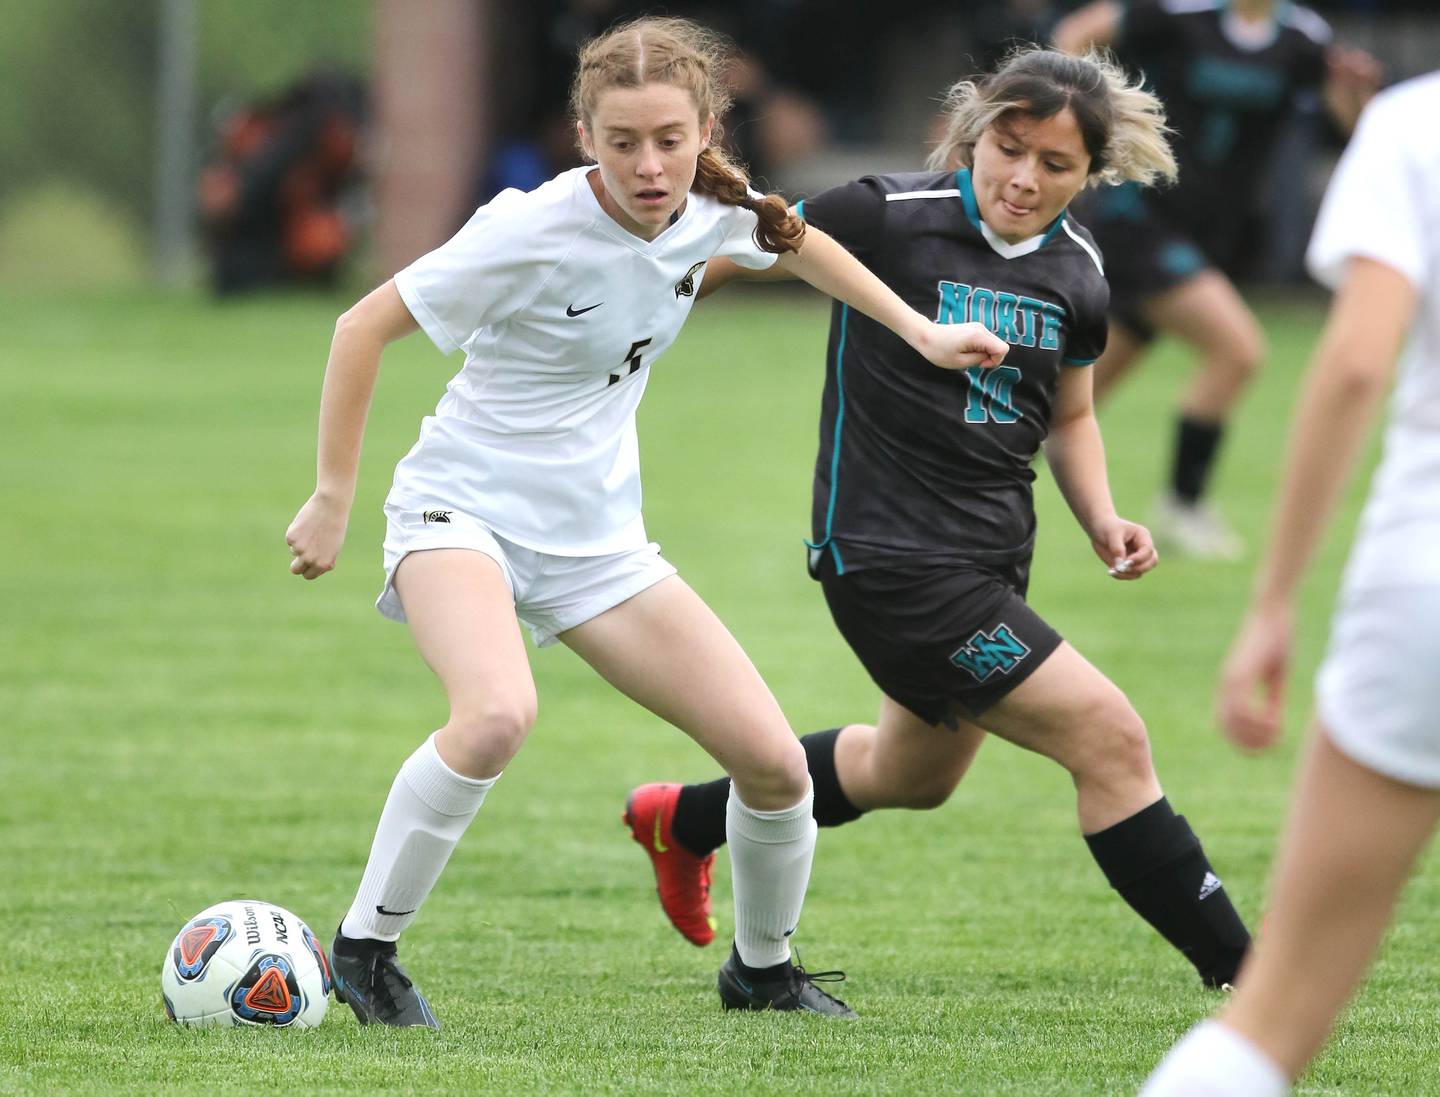 Sycamore's Grace Parks and Woodstock North's Karen Zamudio go after the ball during their IHSA Class 2A regional game Tuesday, May 17, 2022, at Burlington Central High School.